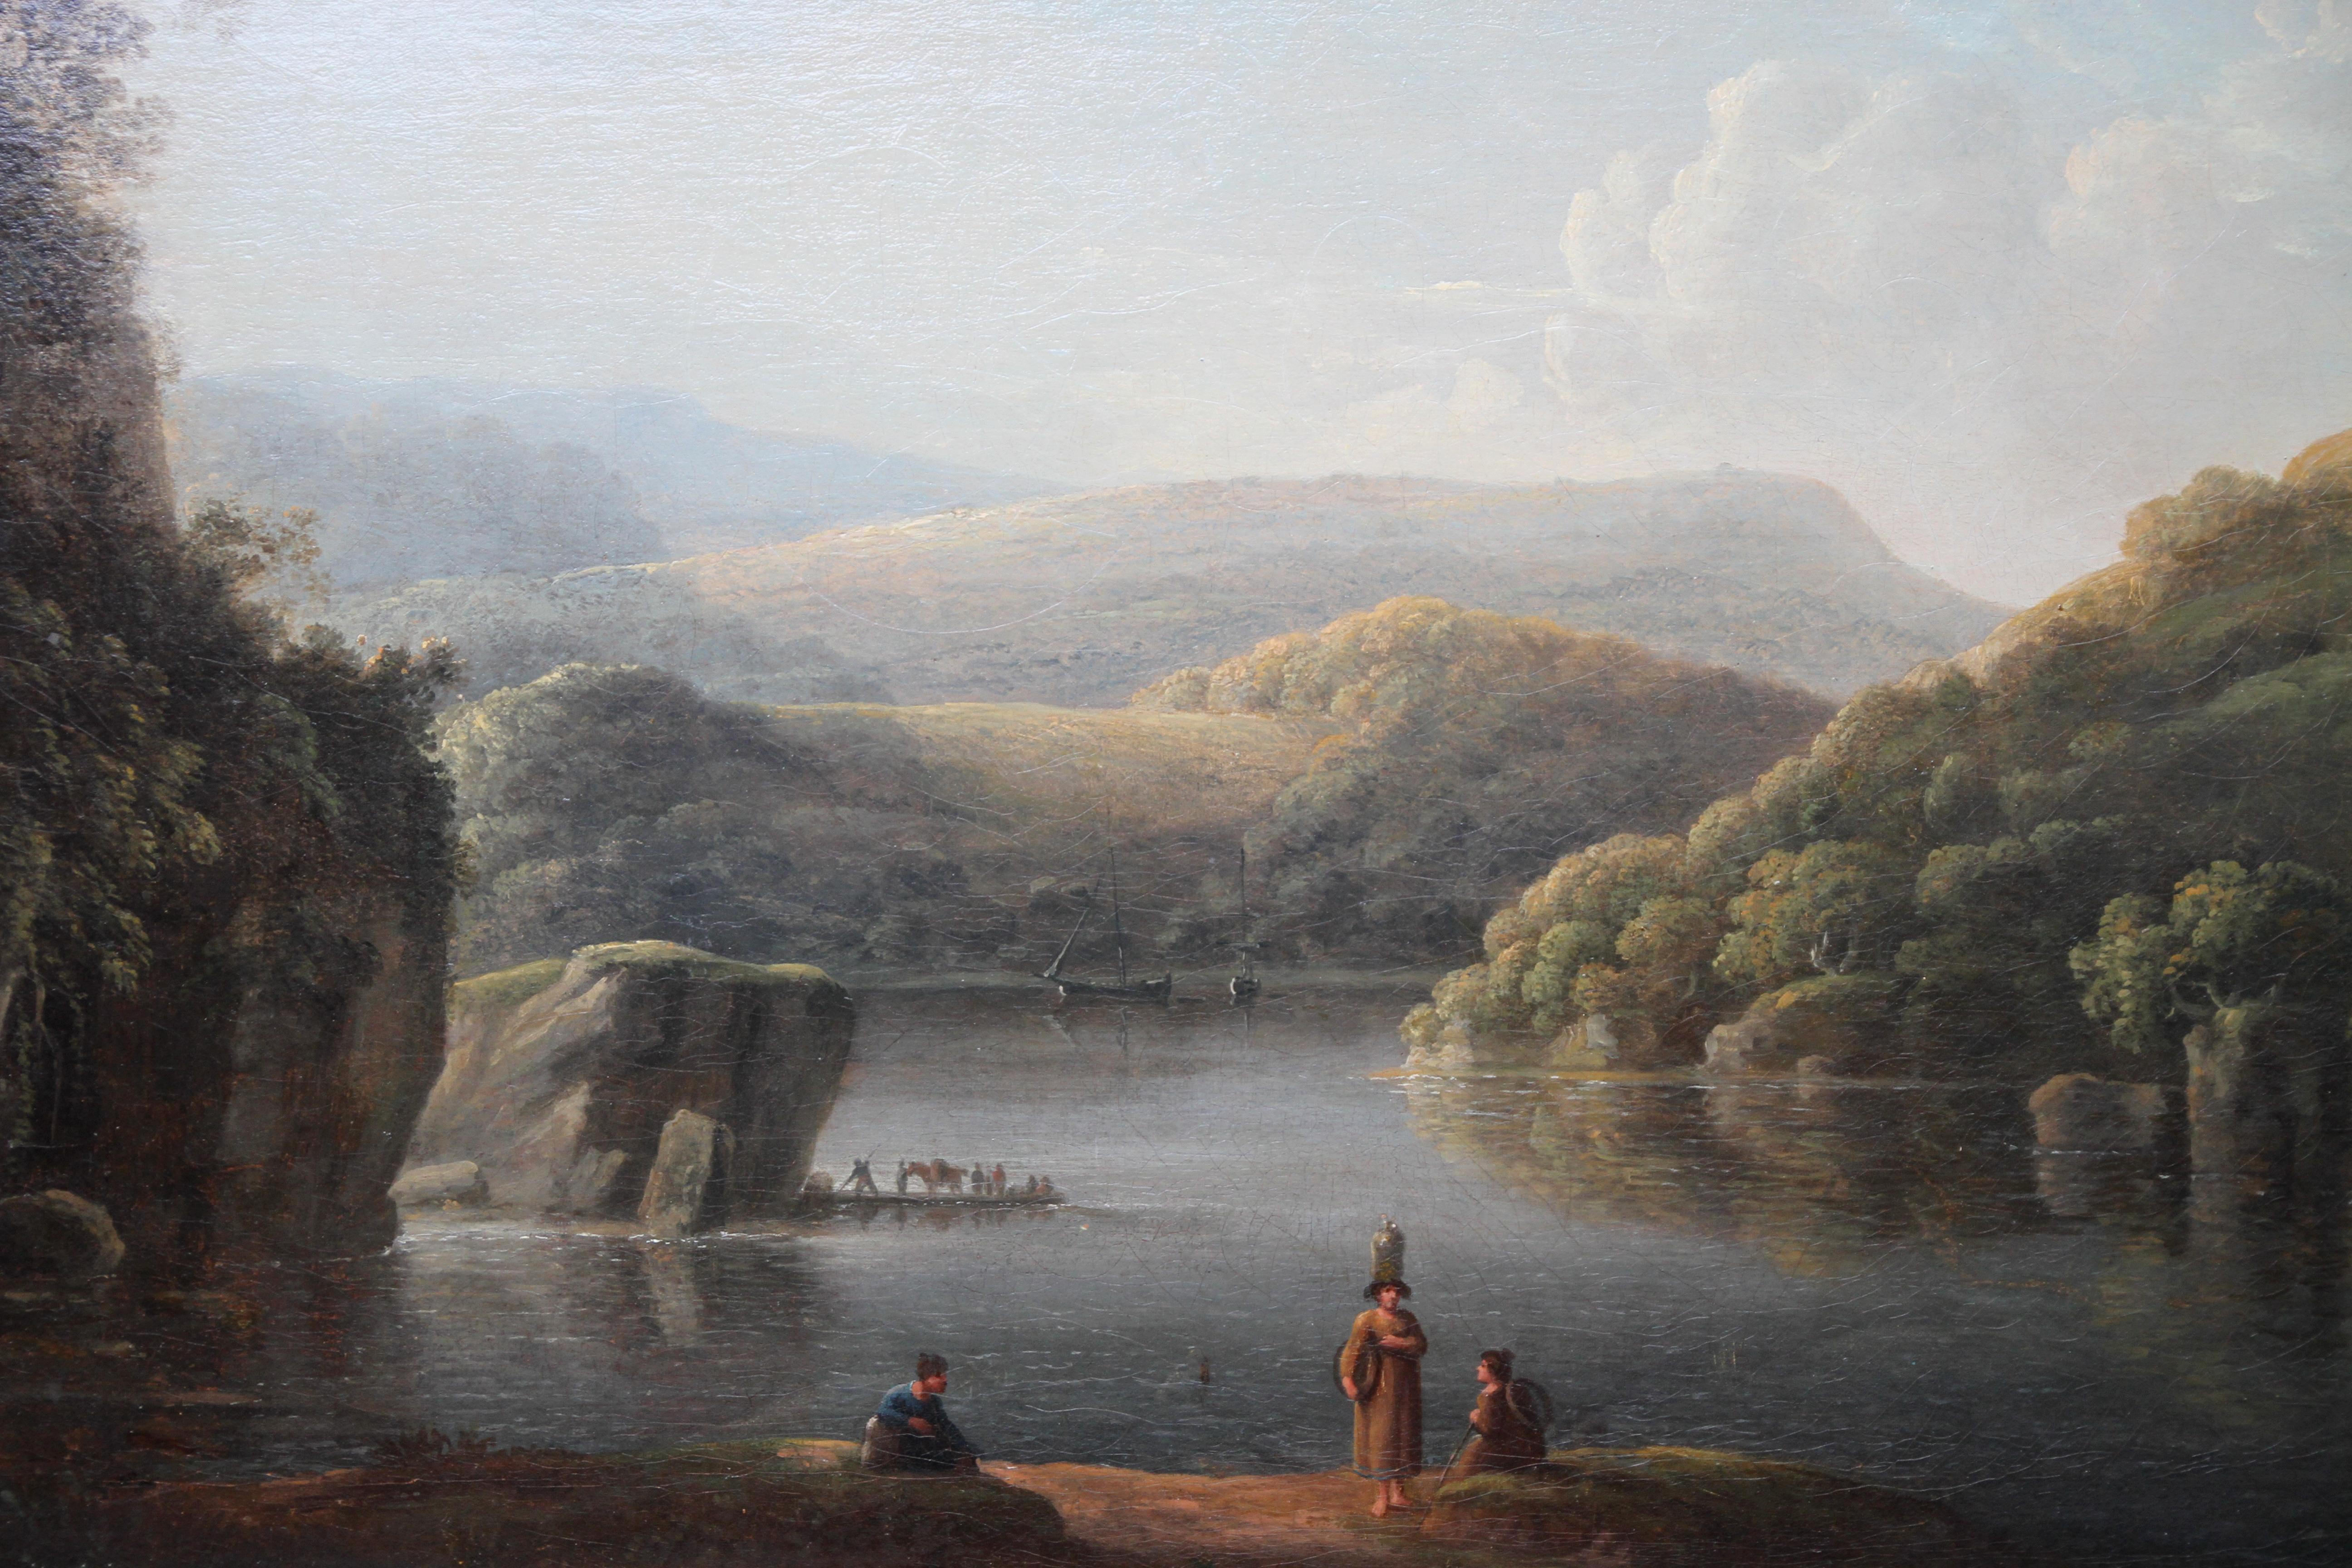 A fine British Old Master landscape oil on canvas painting by Anthony Devis. It depicts the Welsh landscape of the River Neath in Glamorganshire from the Britton Ferry. The painting dates to circa 1790 and is housed in a gallery frame. A fine Old